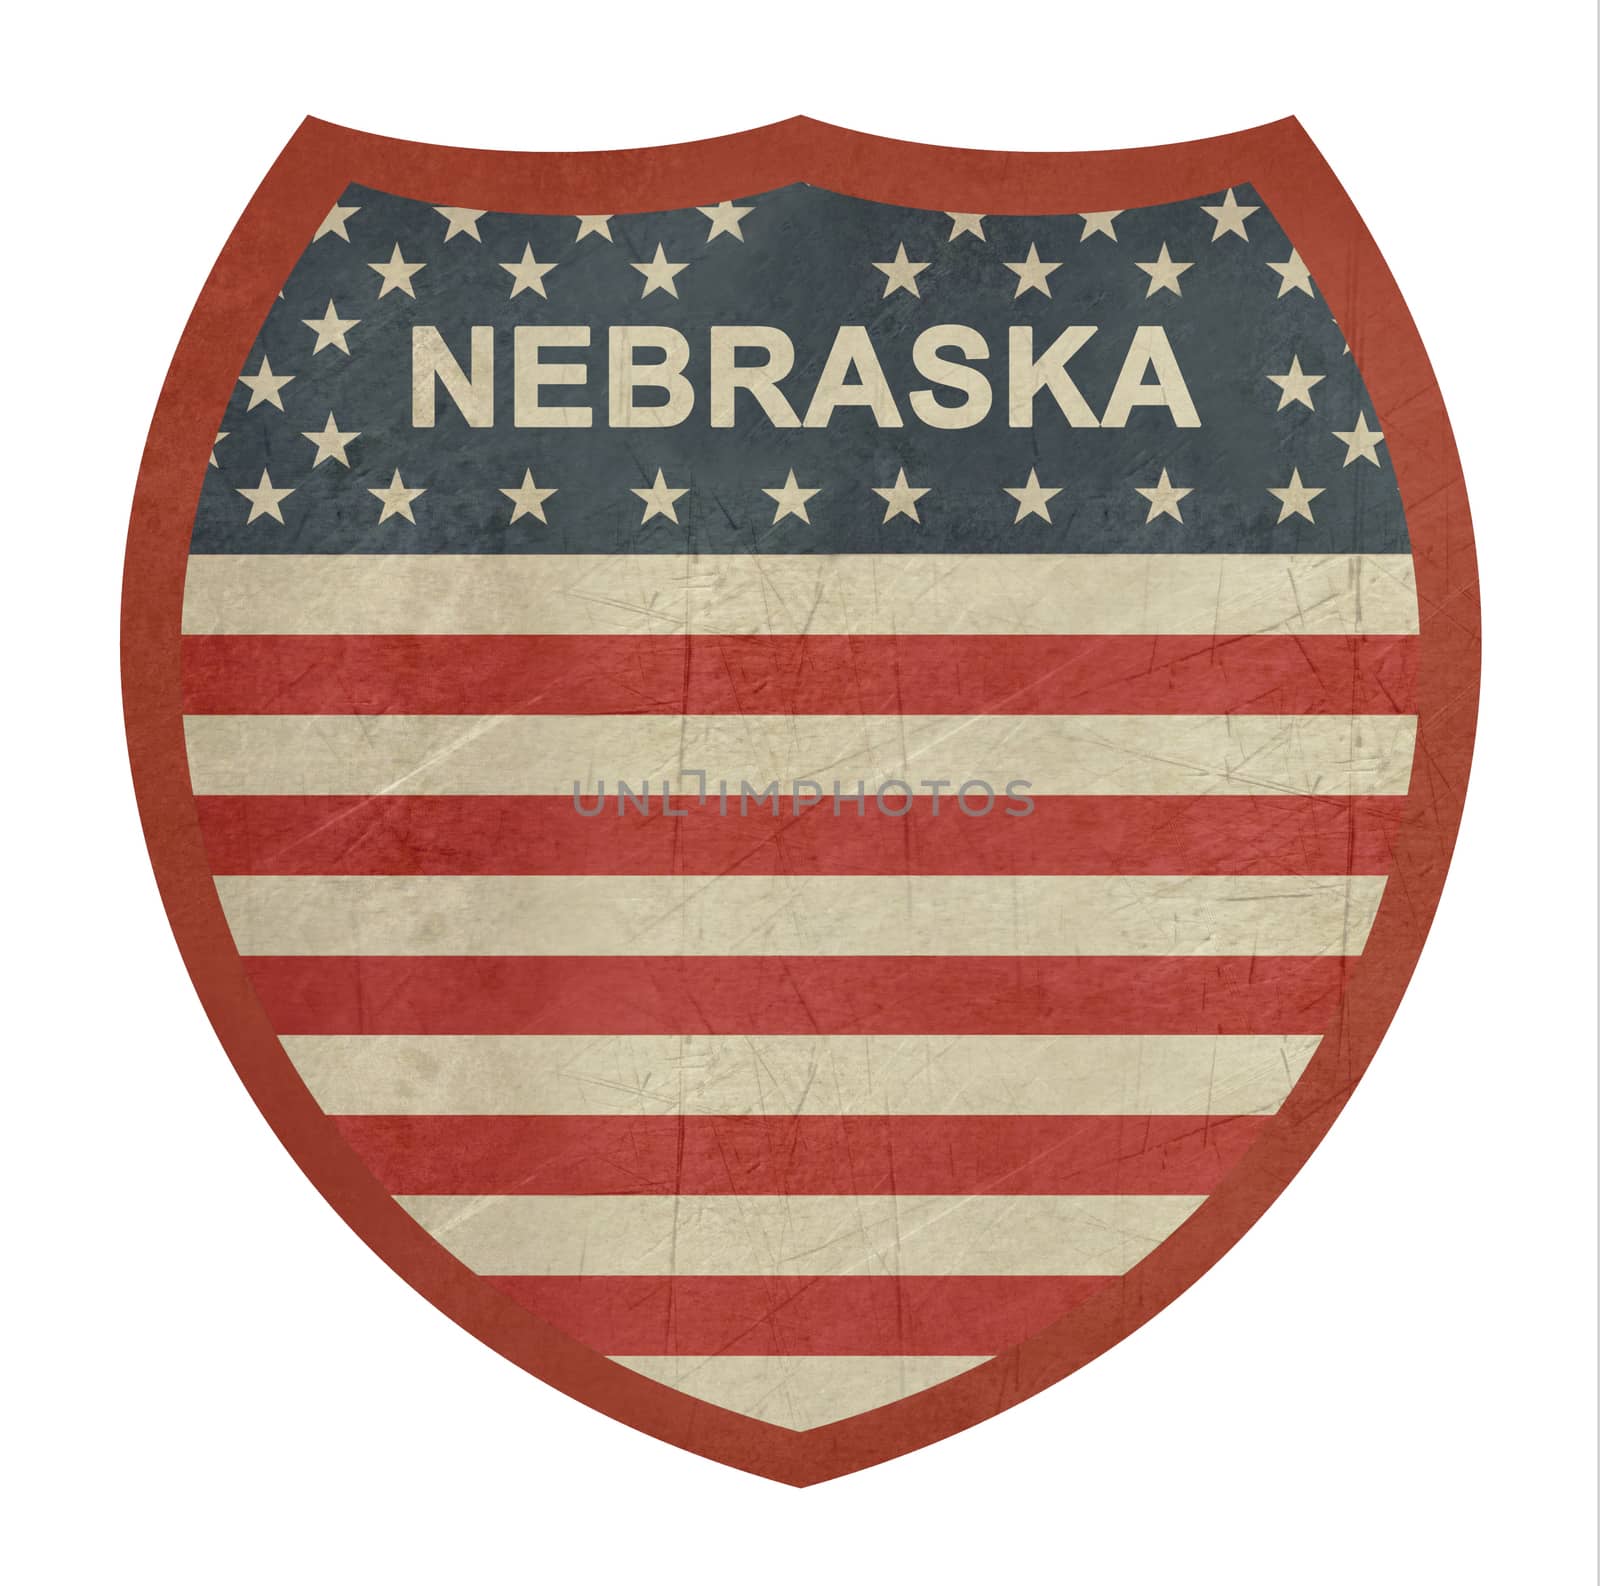 Grunge Nebraska American interstate highway sign isolated on a white background.